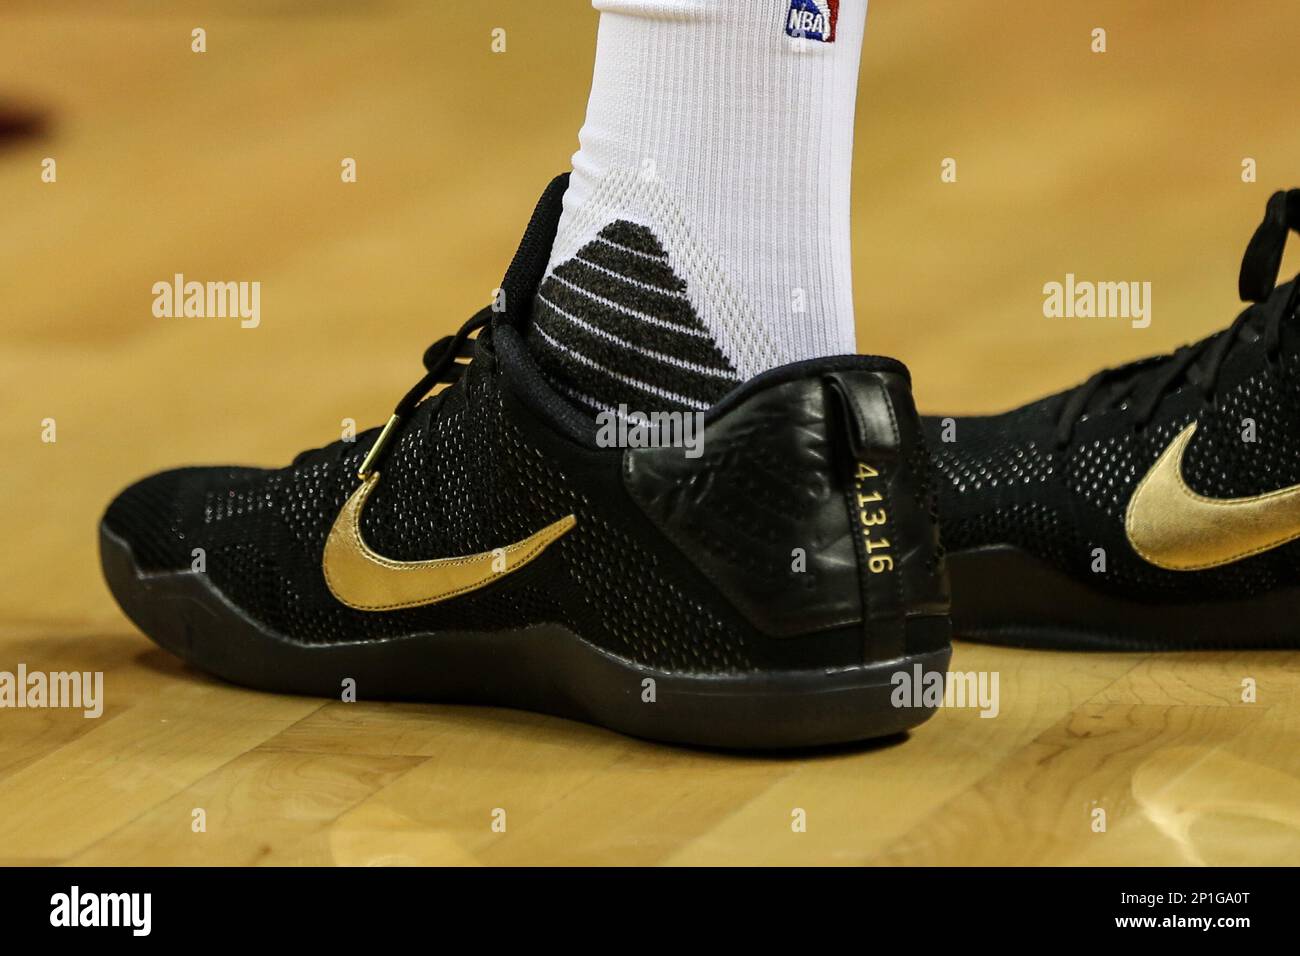 April 13, 2016 - Players wear a special players edition of the Nike Kobe 11  on Kobe Bryant's last game. The Portland Trail Blazers hosted the Denver  Nuggets at the Moda Center